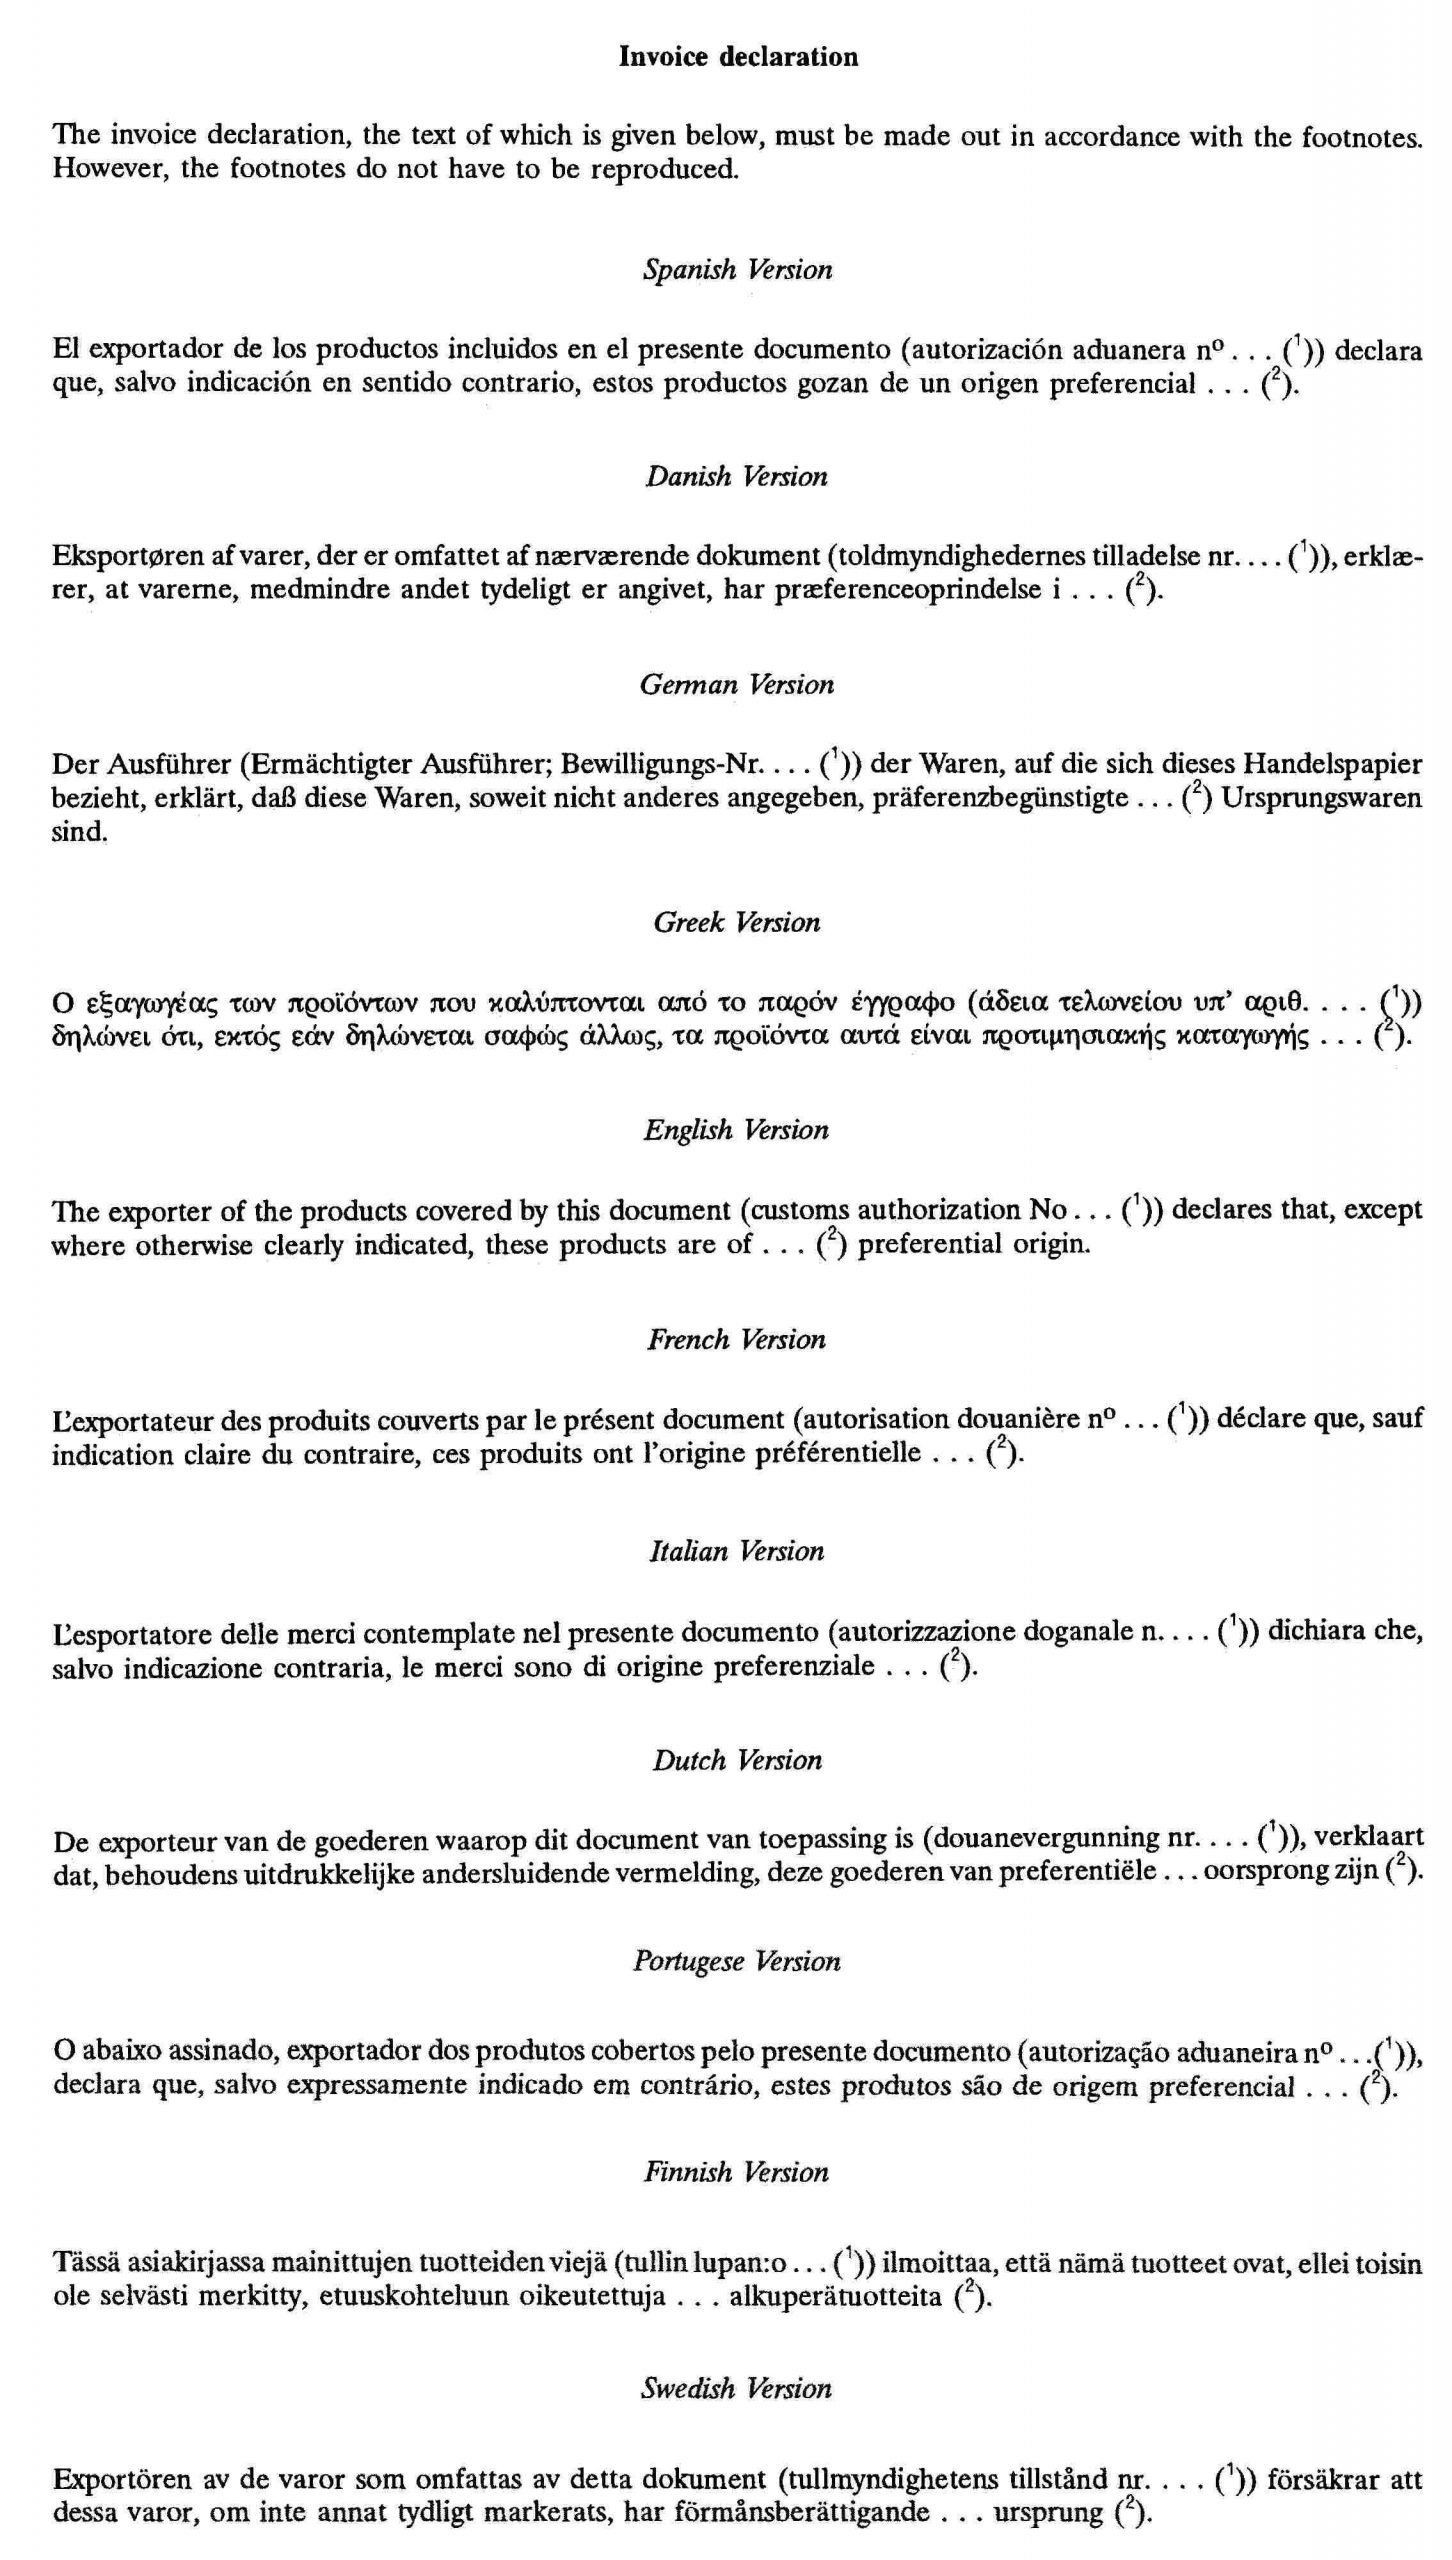 Periodic Table Webquest Worksheet Answers 20 Periodic Table Webquest Worksheet Answers In 2020